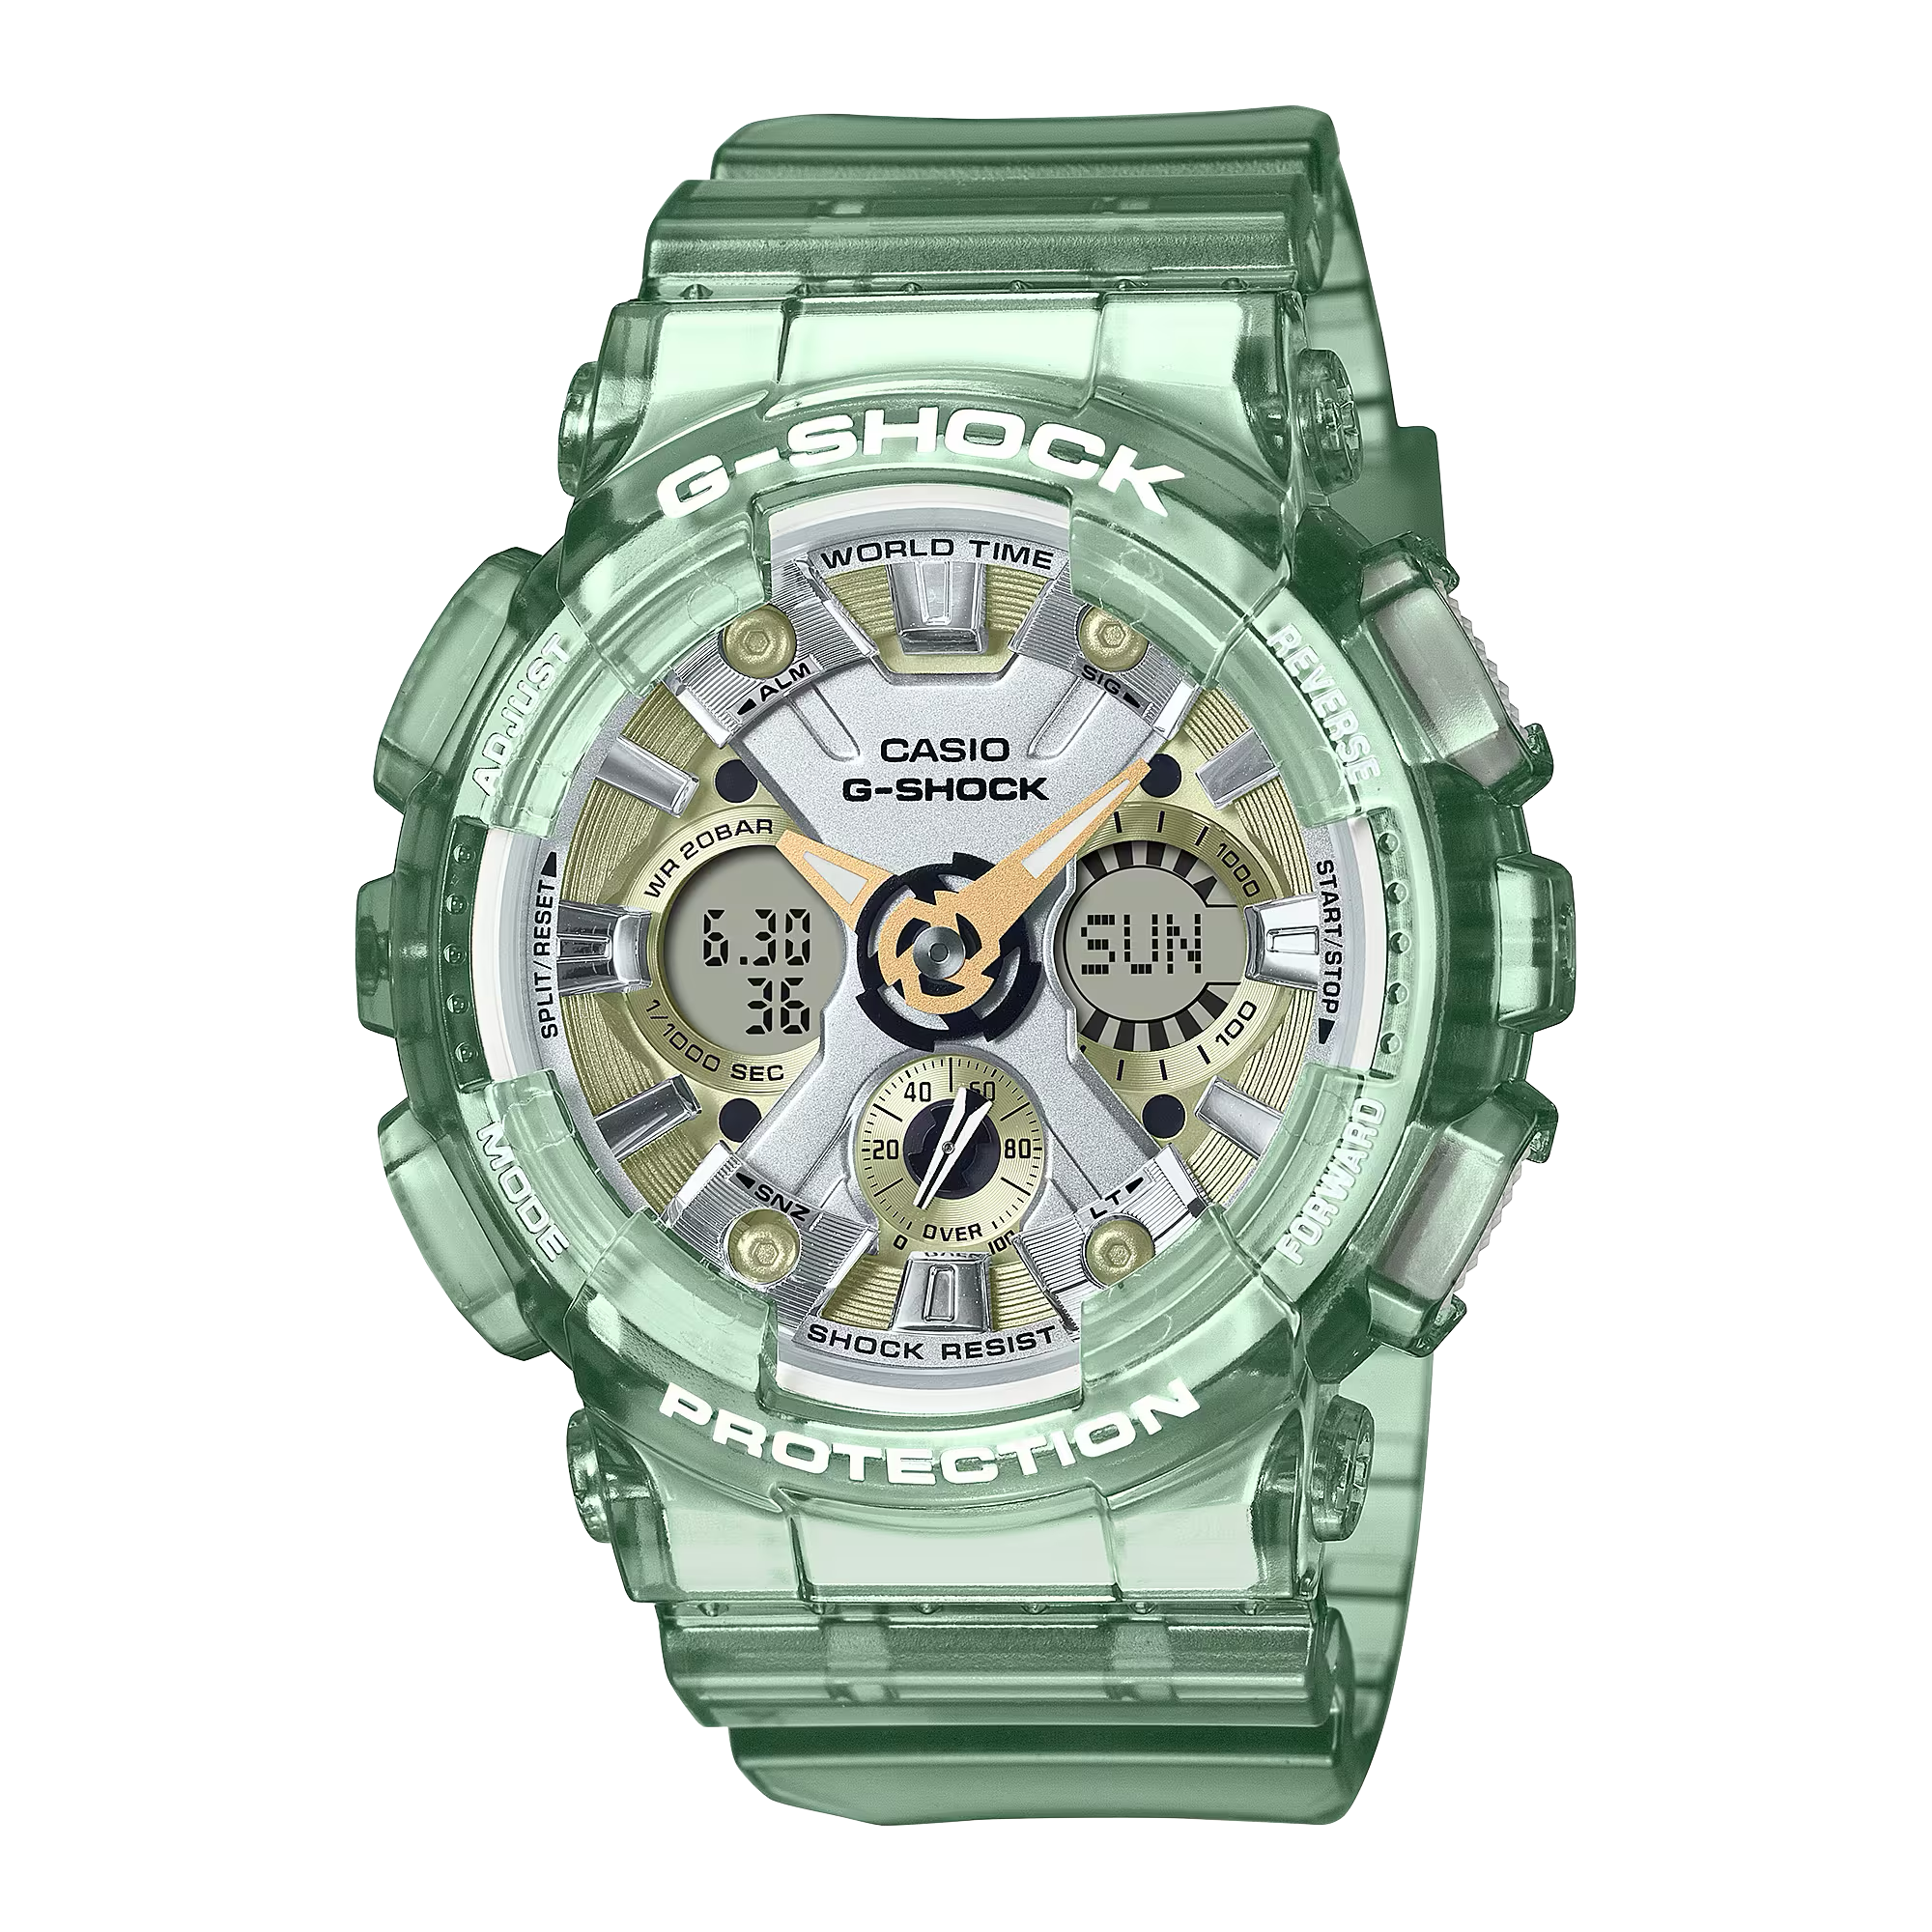 Casio G-Shock for Ladies' See-Through Subtle Green Resin Band Watch GMAS120GS-3A GMA-S120GS-3A